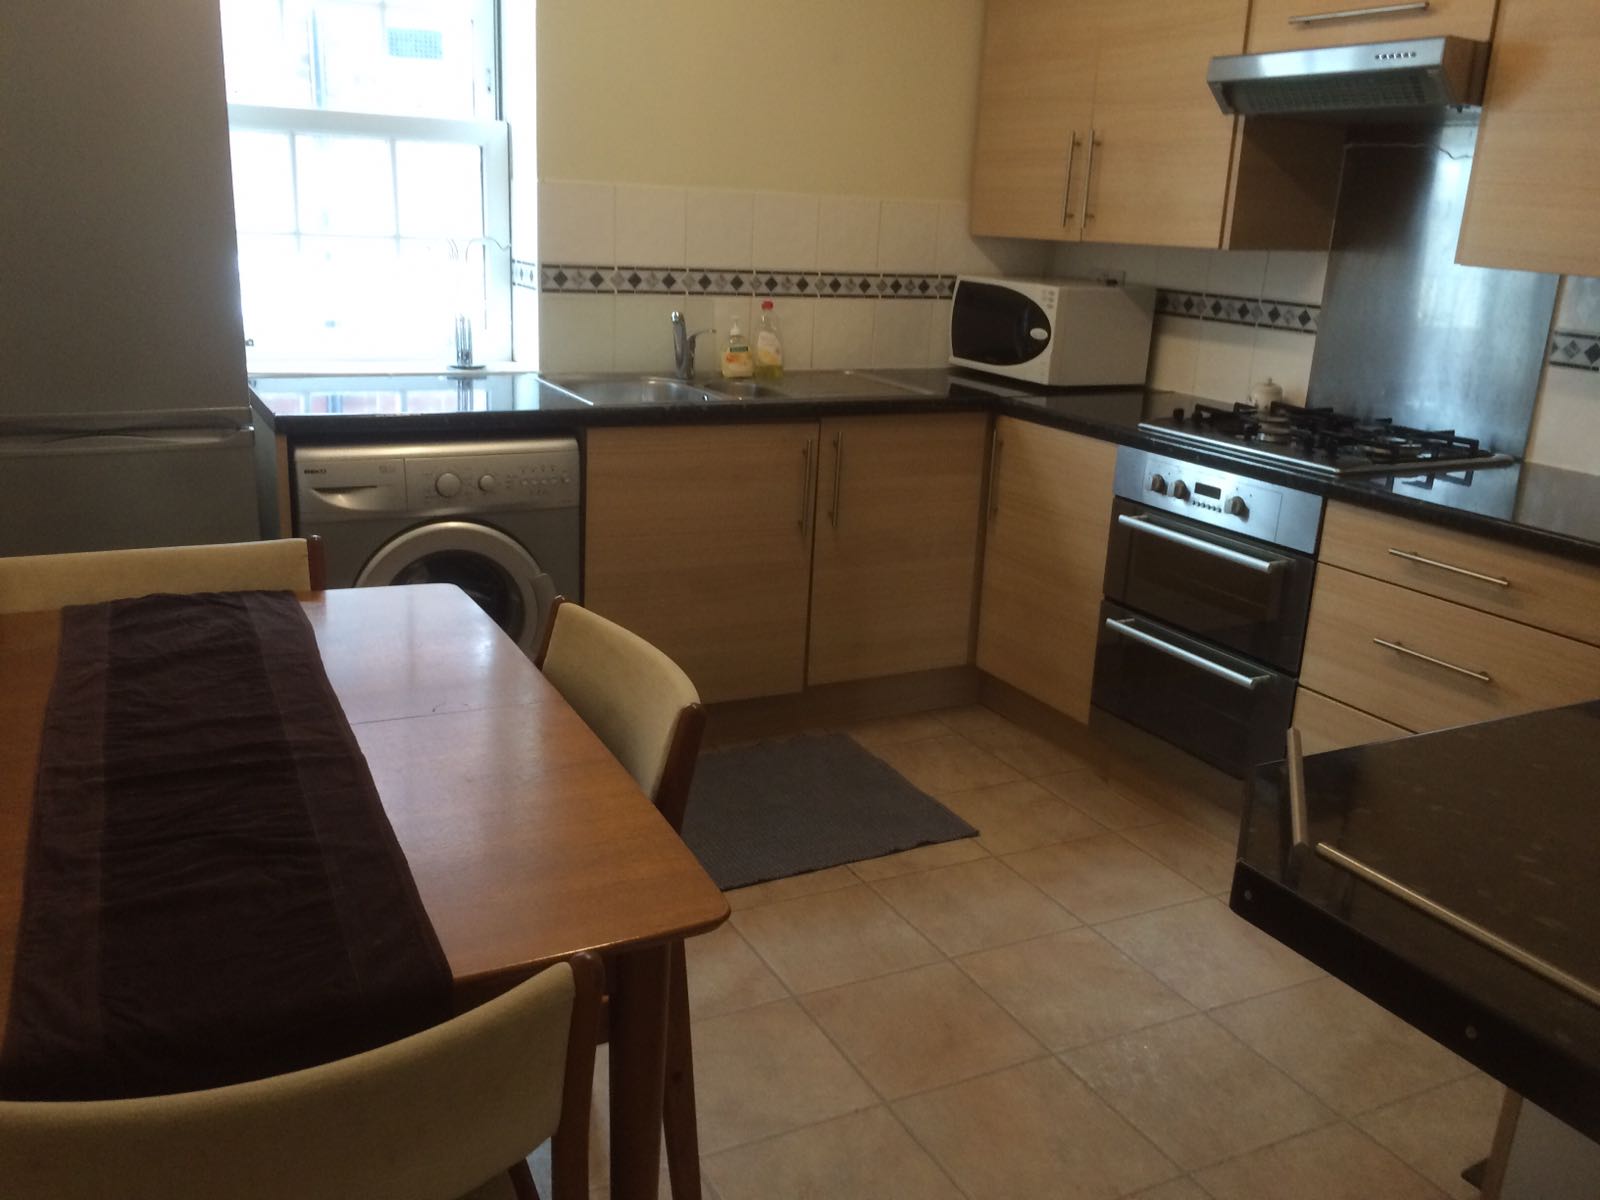 Spacious one bedroom flat Kings Cross area with council tax inclusive. 